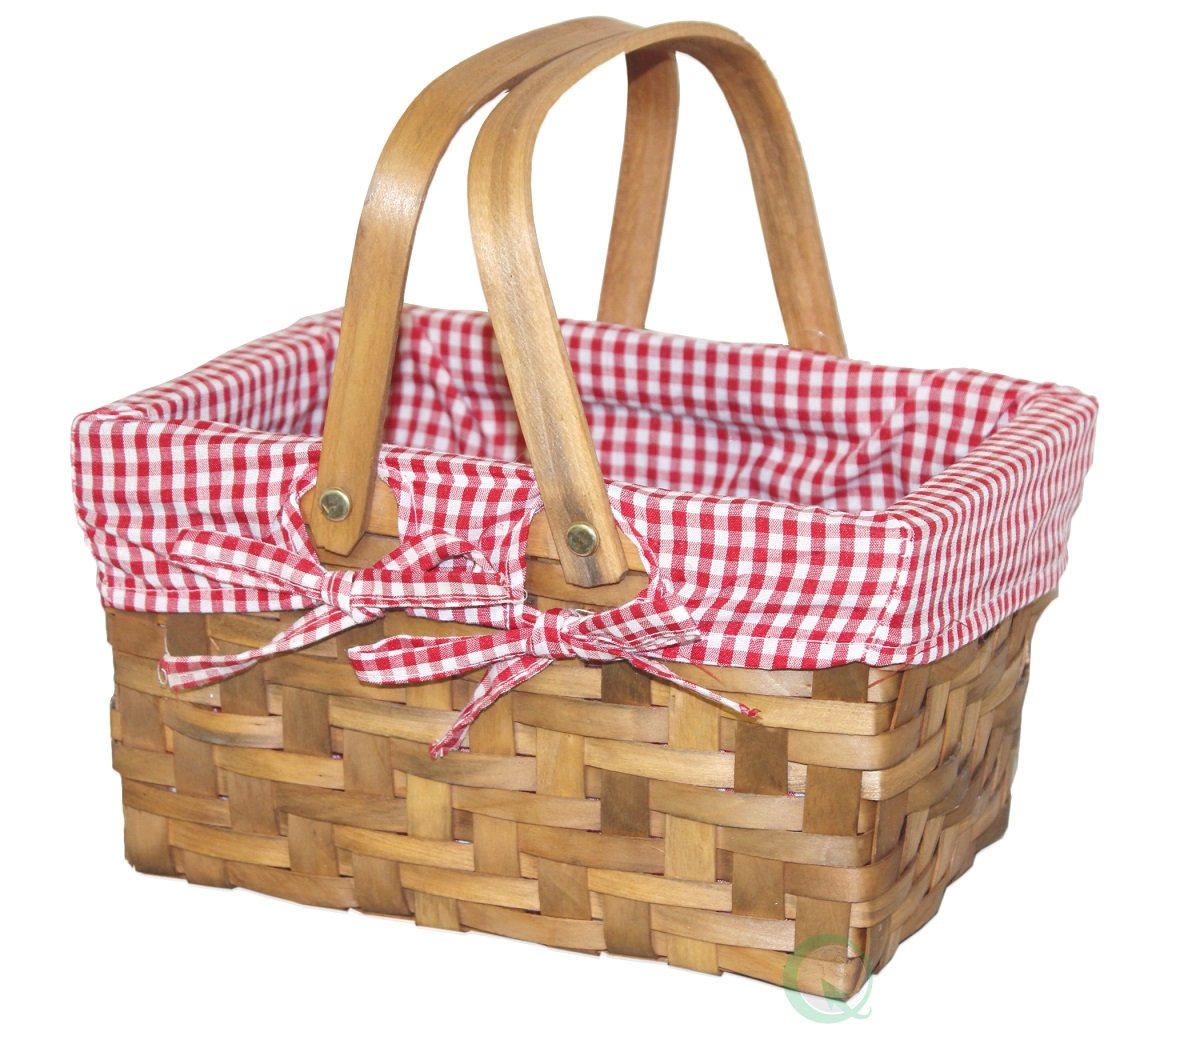 Picture of Vintiquewise QI003085 5.5 x 10.2 x 7.7 in. Rectangular Basket Lined with Gingham Lining, Brown - Small